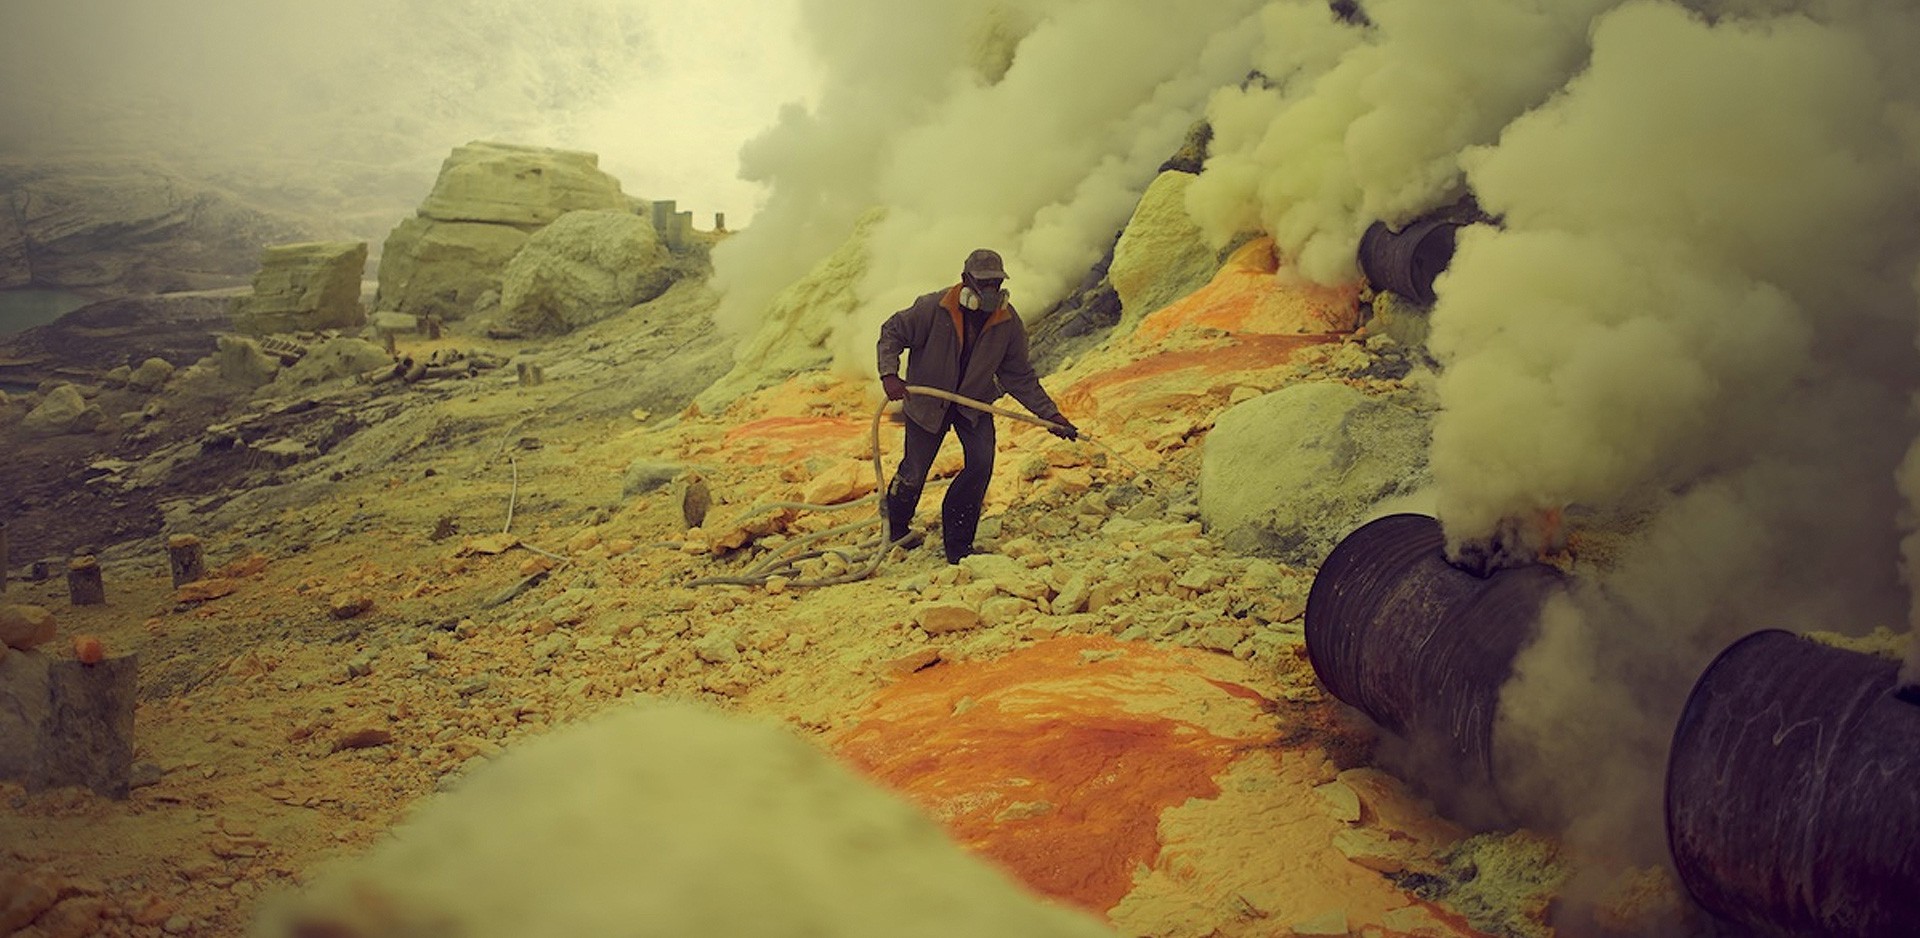 A man mining sulfur in Indonesia. There are plumes of smoke on the left, and the ground is covered with orange and grey rocks.